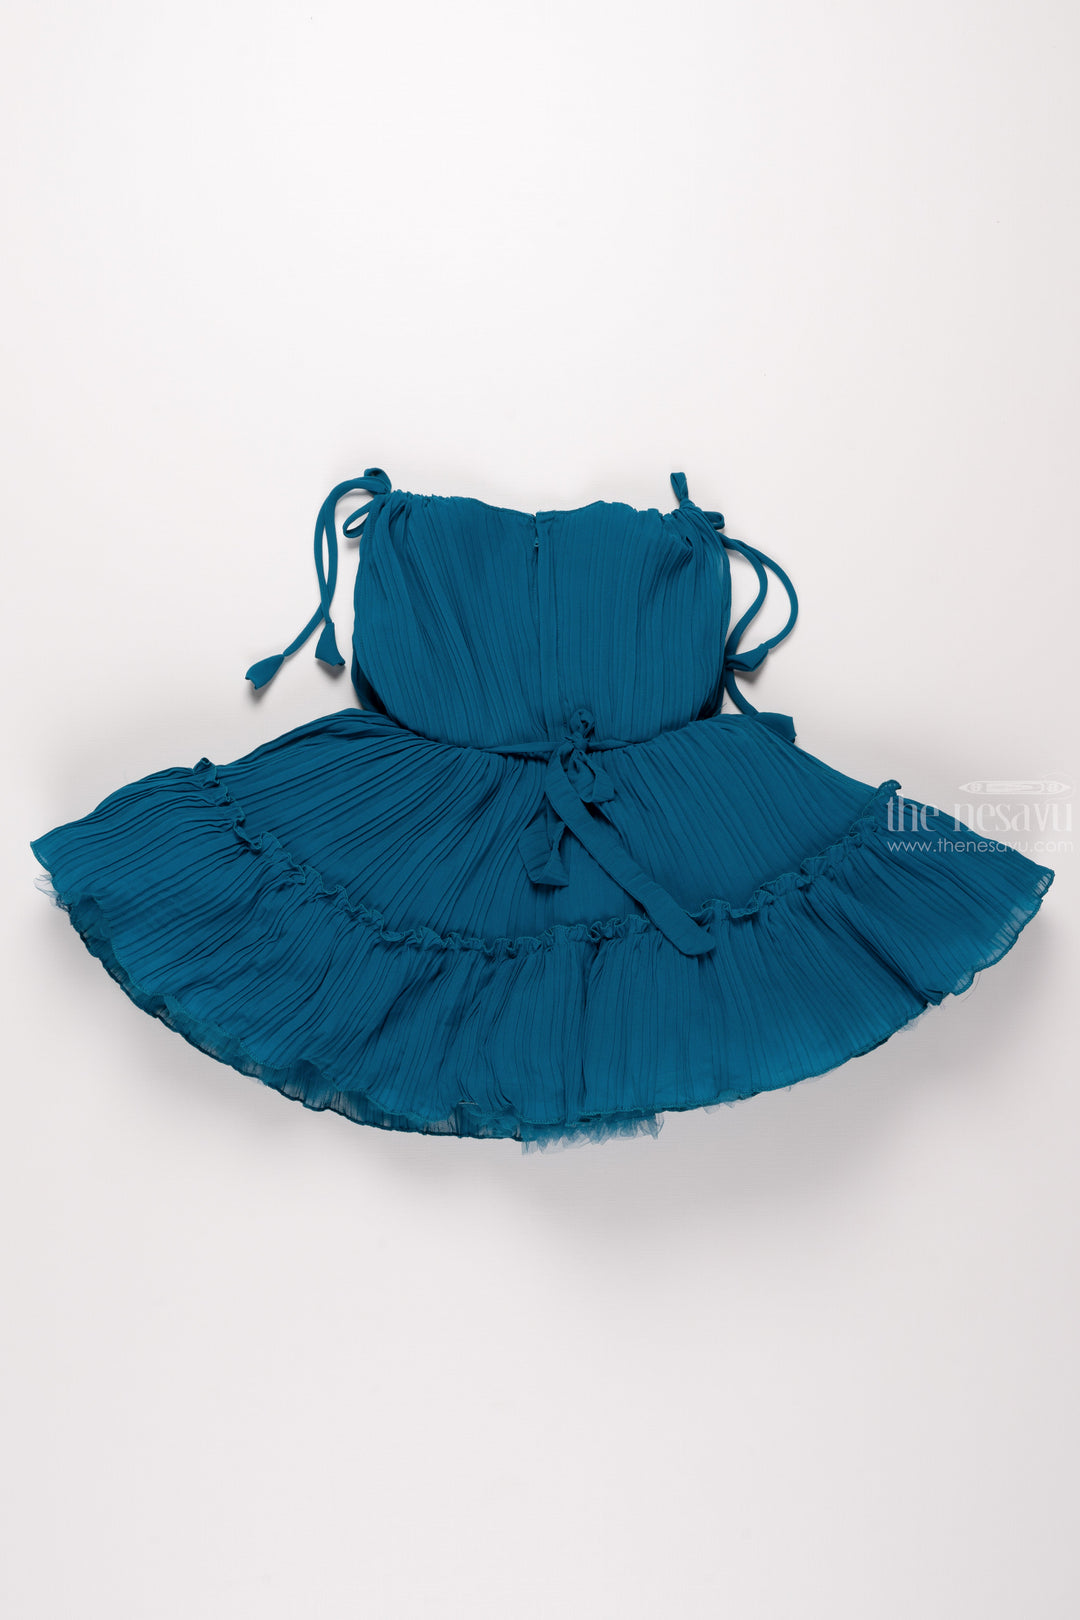 The Nesavu Girls Fancy Party Frock Azure Elegance: Girls Pleated Blue Georgette Party Dress Nesavu Stunning Girls Party Frocks | Perfect for Special Occasions | The Nesavu